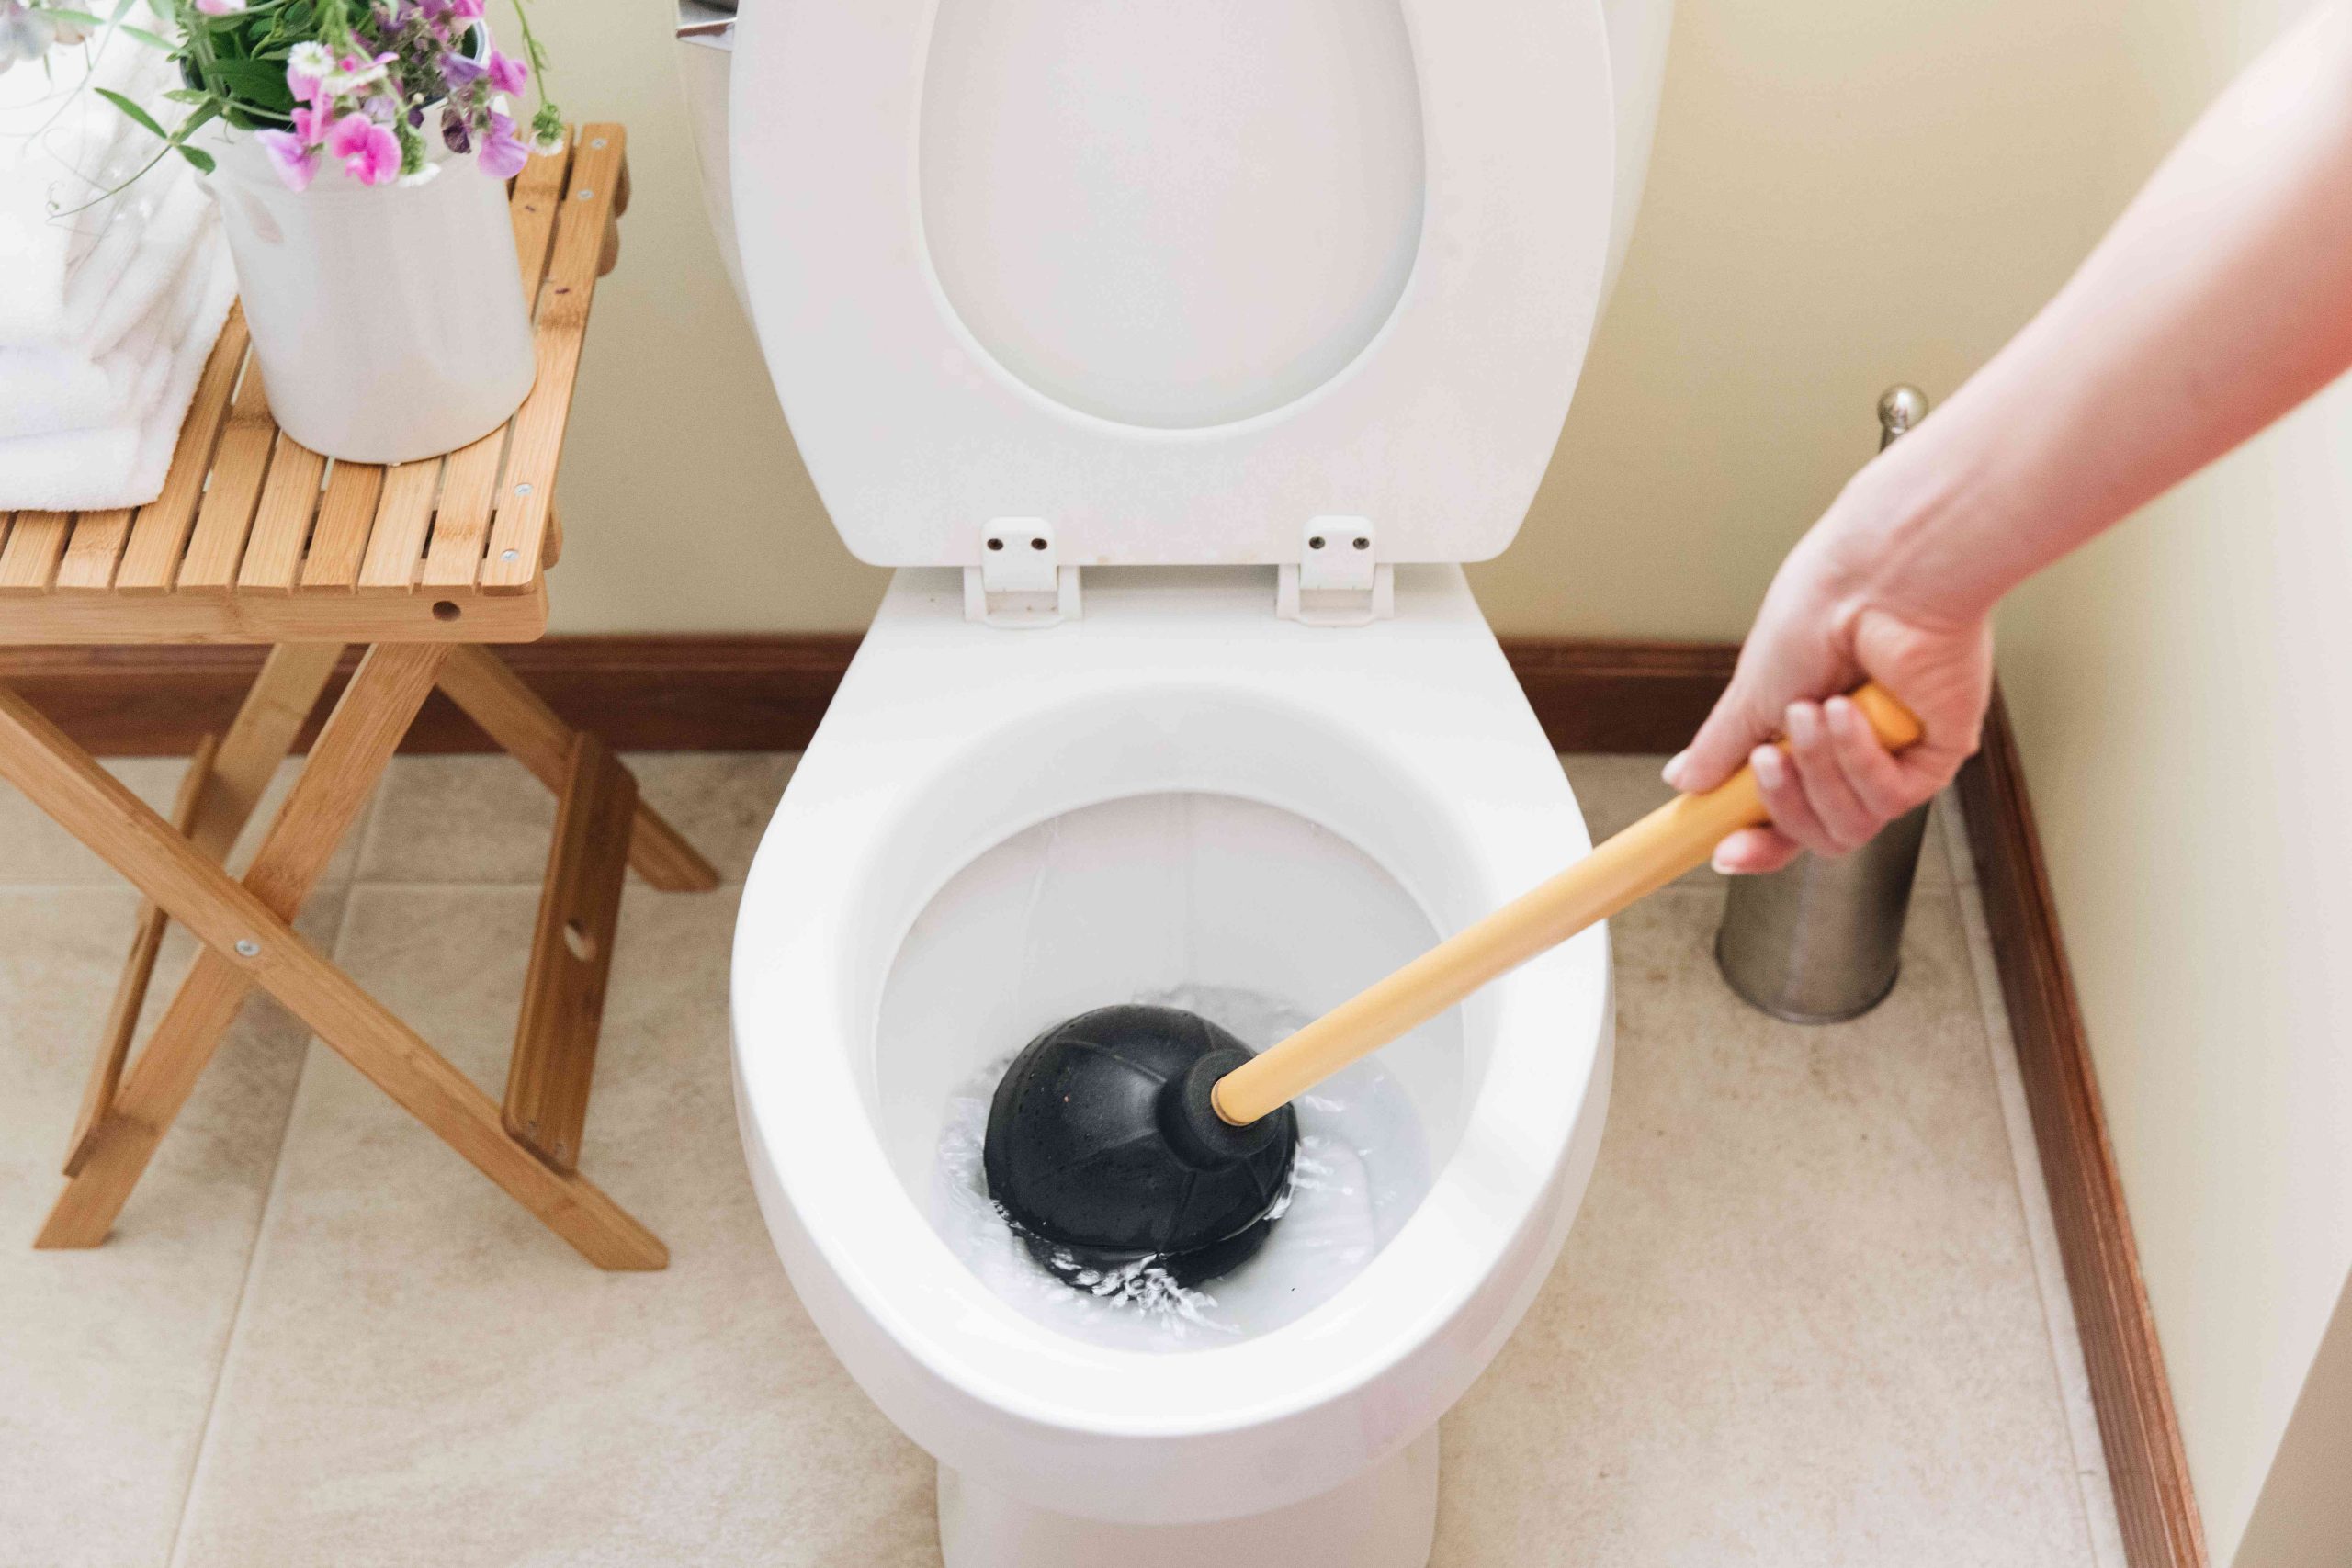 How to Unclog a Toilet When a Plunger Doesn’t Work